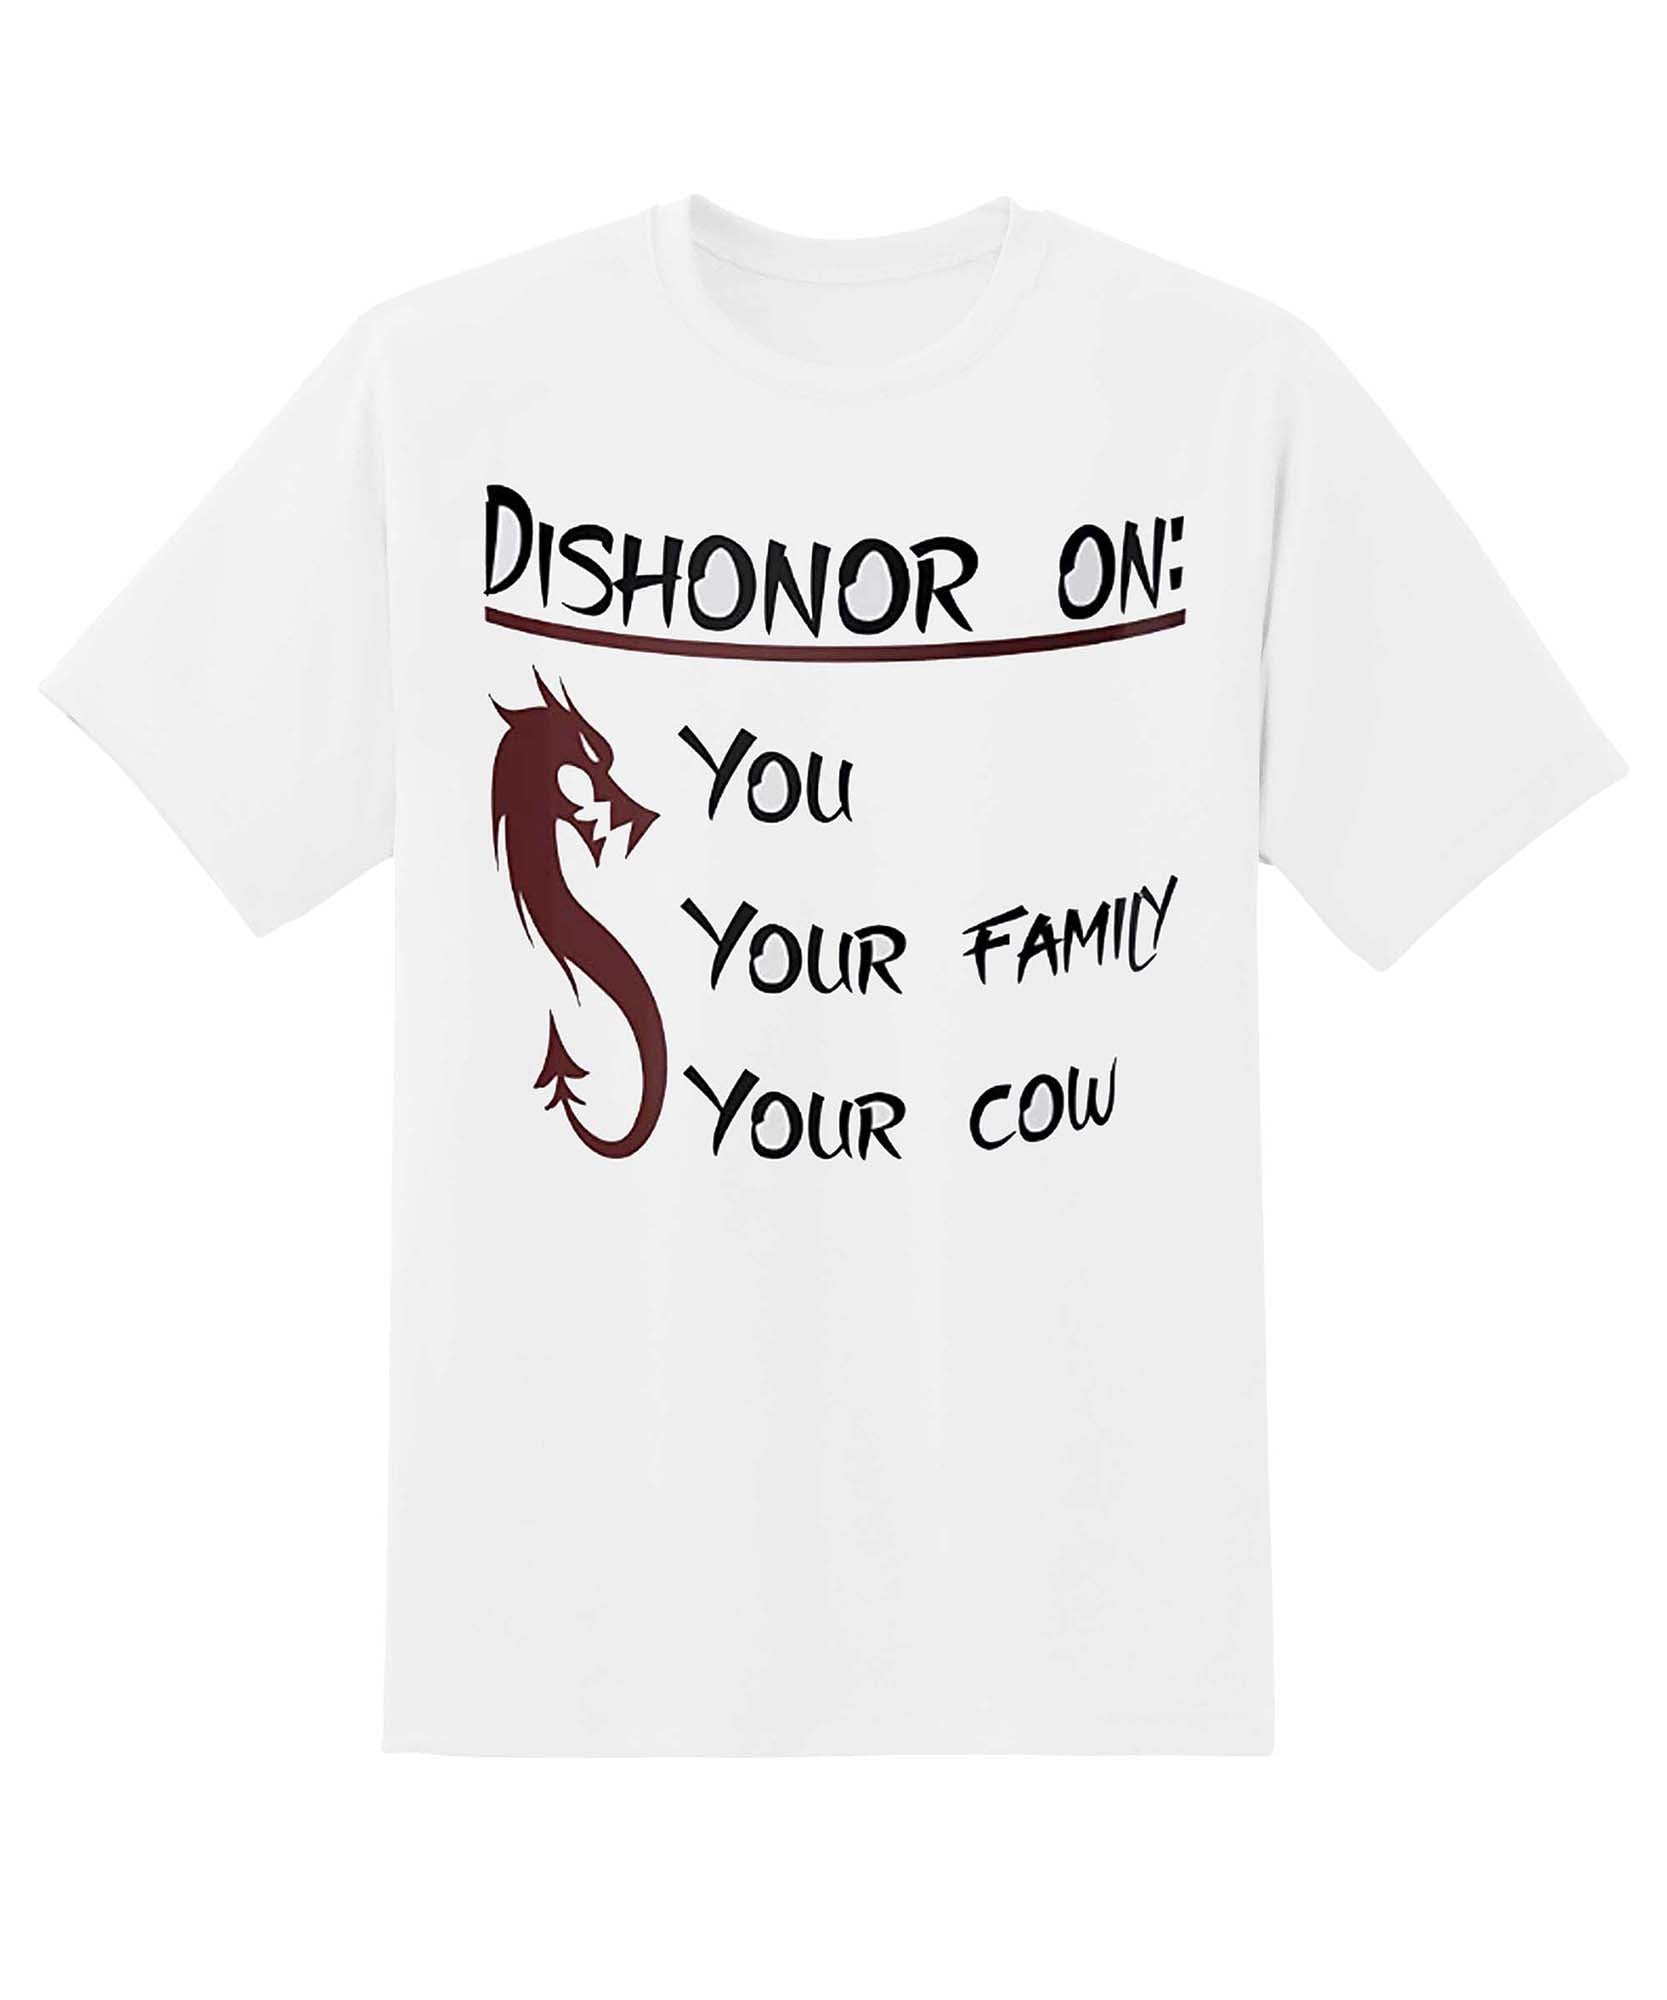 Skitongift Dishonor On You Your Cow And Family Dragons Funny Shirts Hoodie Sweater Short Sleeve Casual Shirt